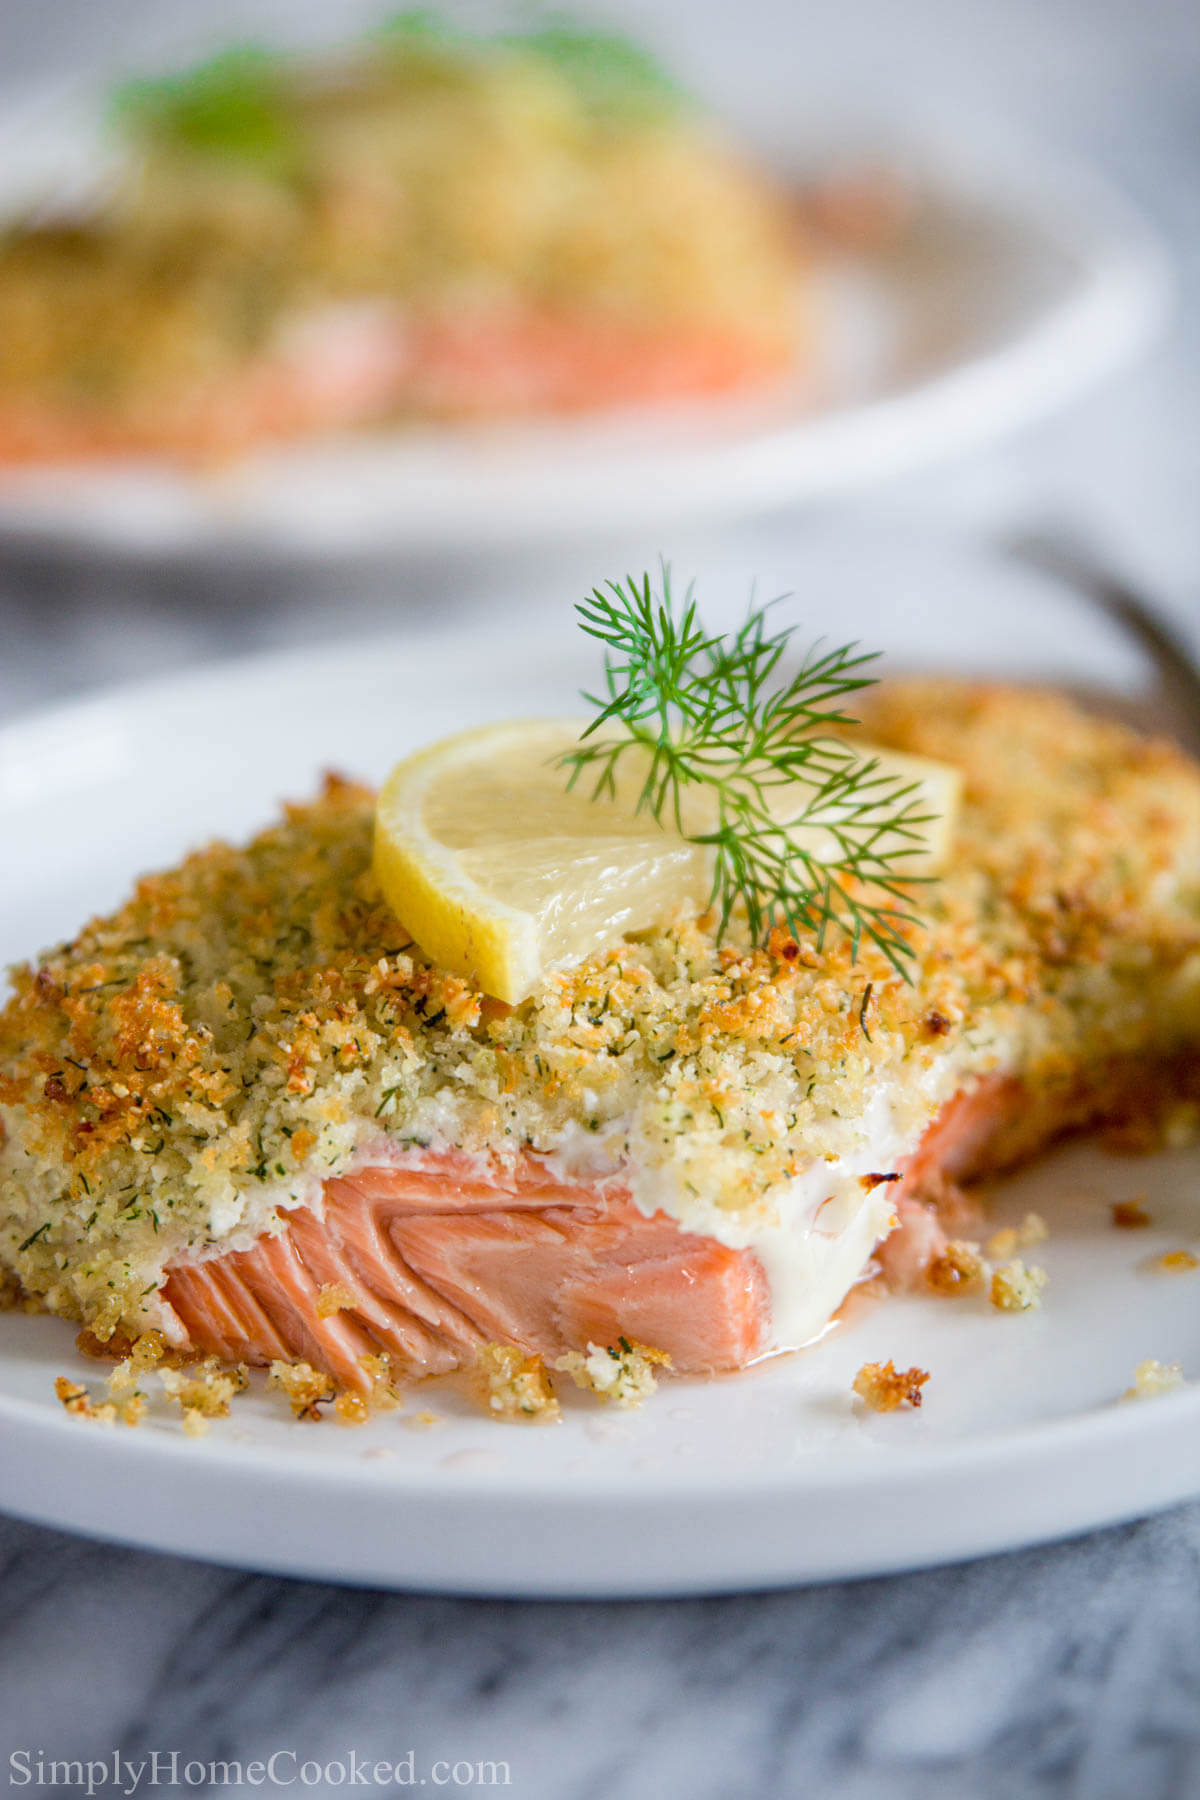 Vertical image of a plate of Panko Crusted Salmon topped with dill and lemon